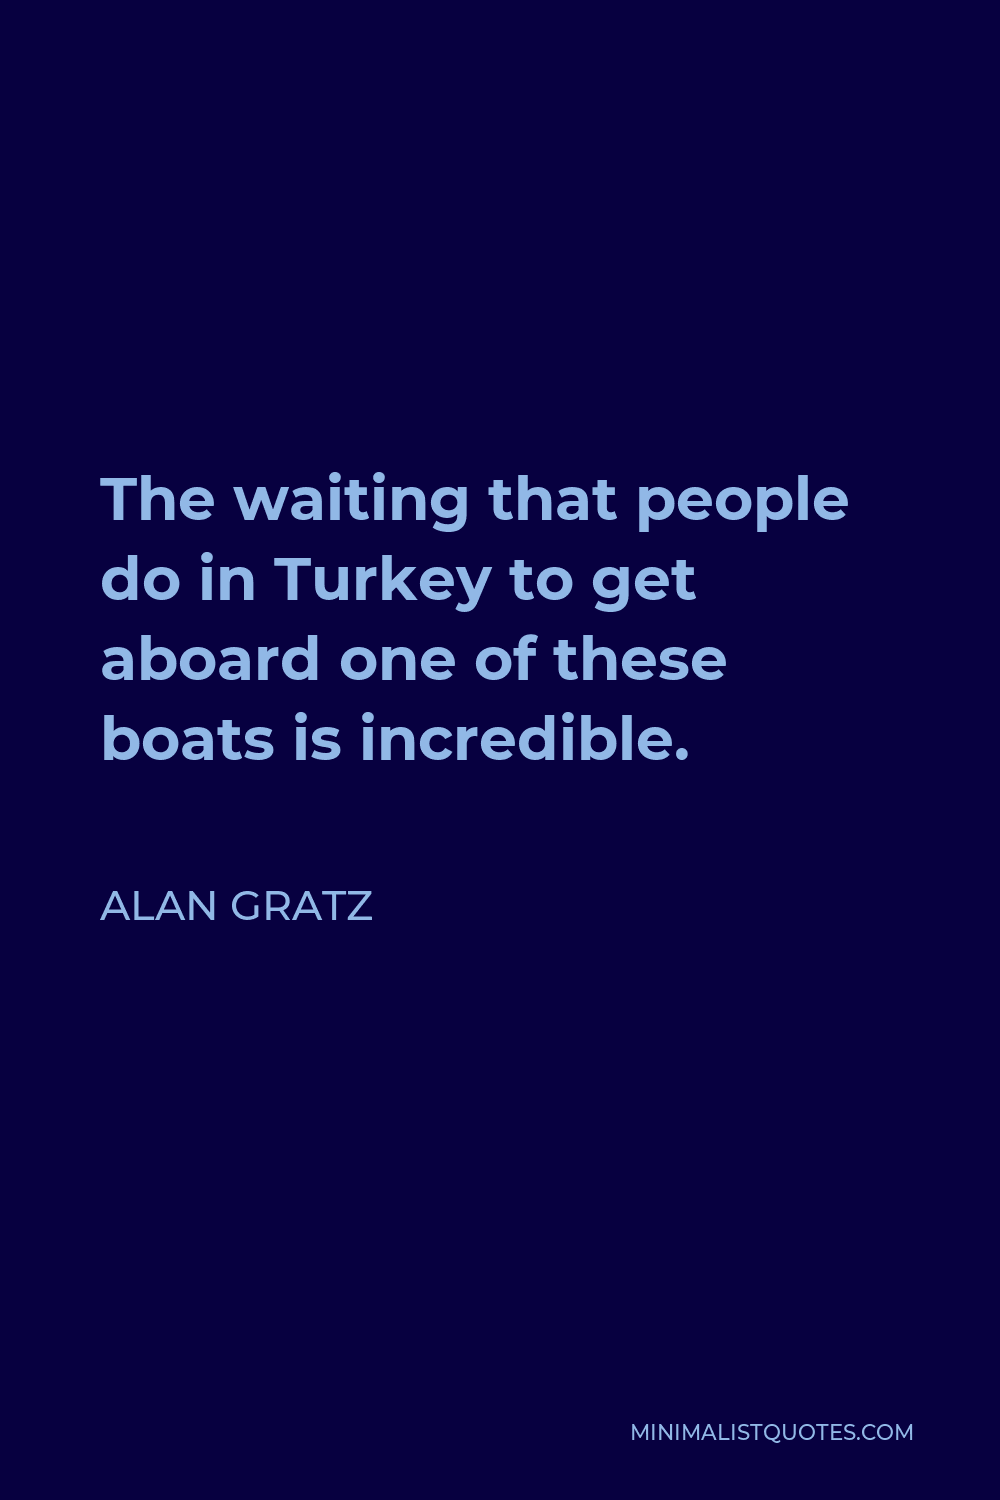 Alan Gratz Quote - The waiting that people do in Turkey to get aboard one of these boats is incredible.